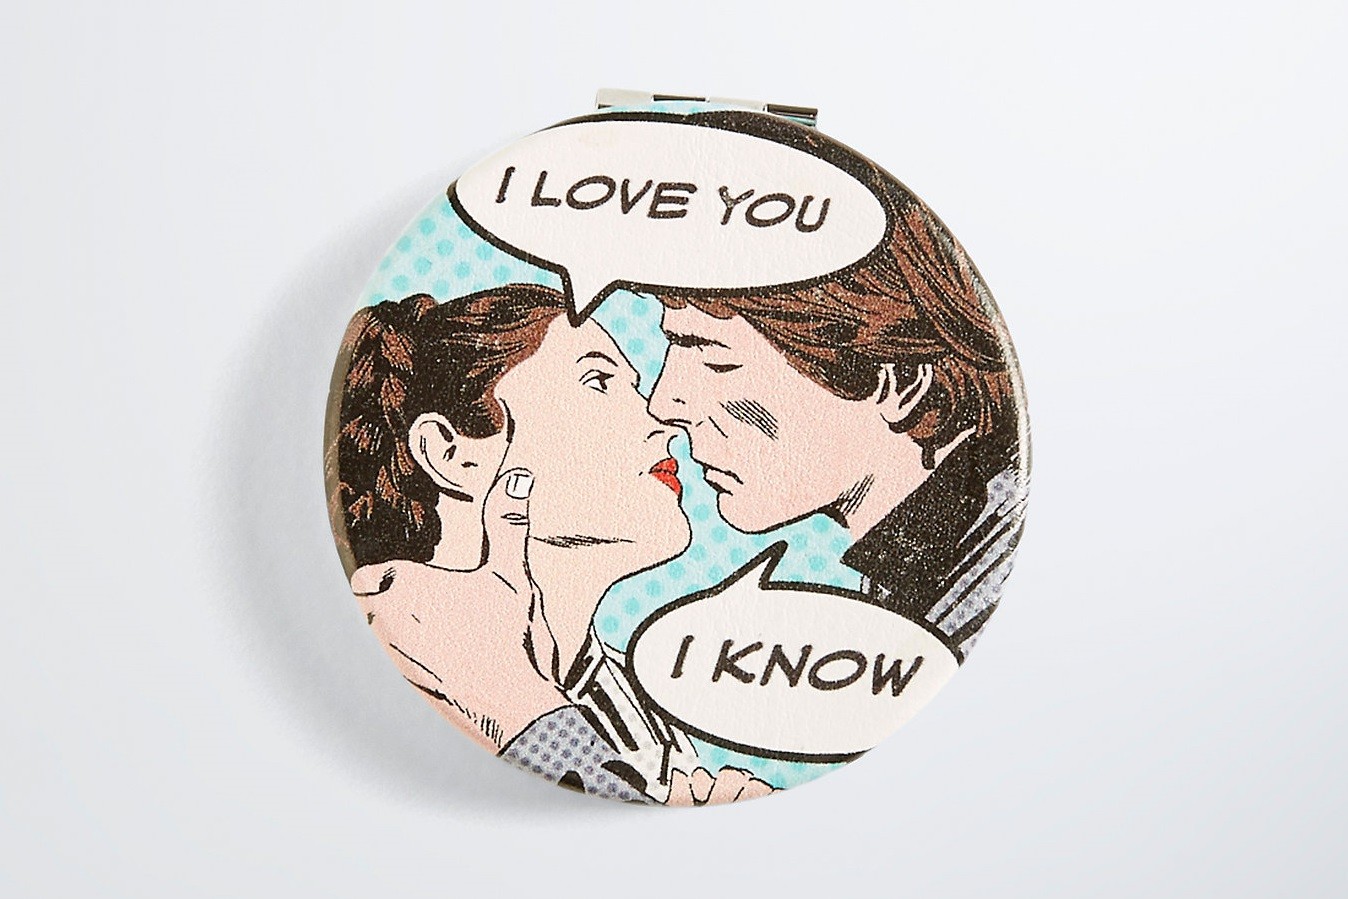 ‘I Love You’ – ‘I Know’ compact mirror